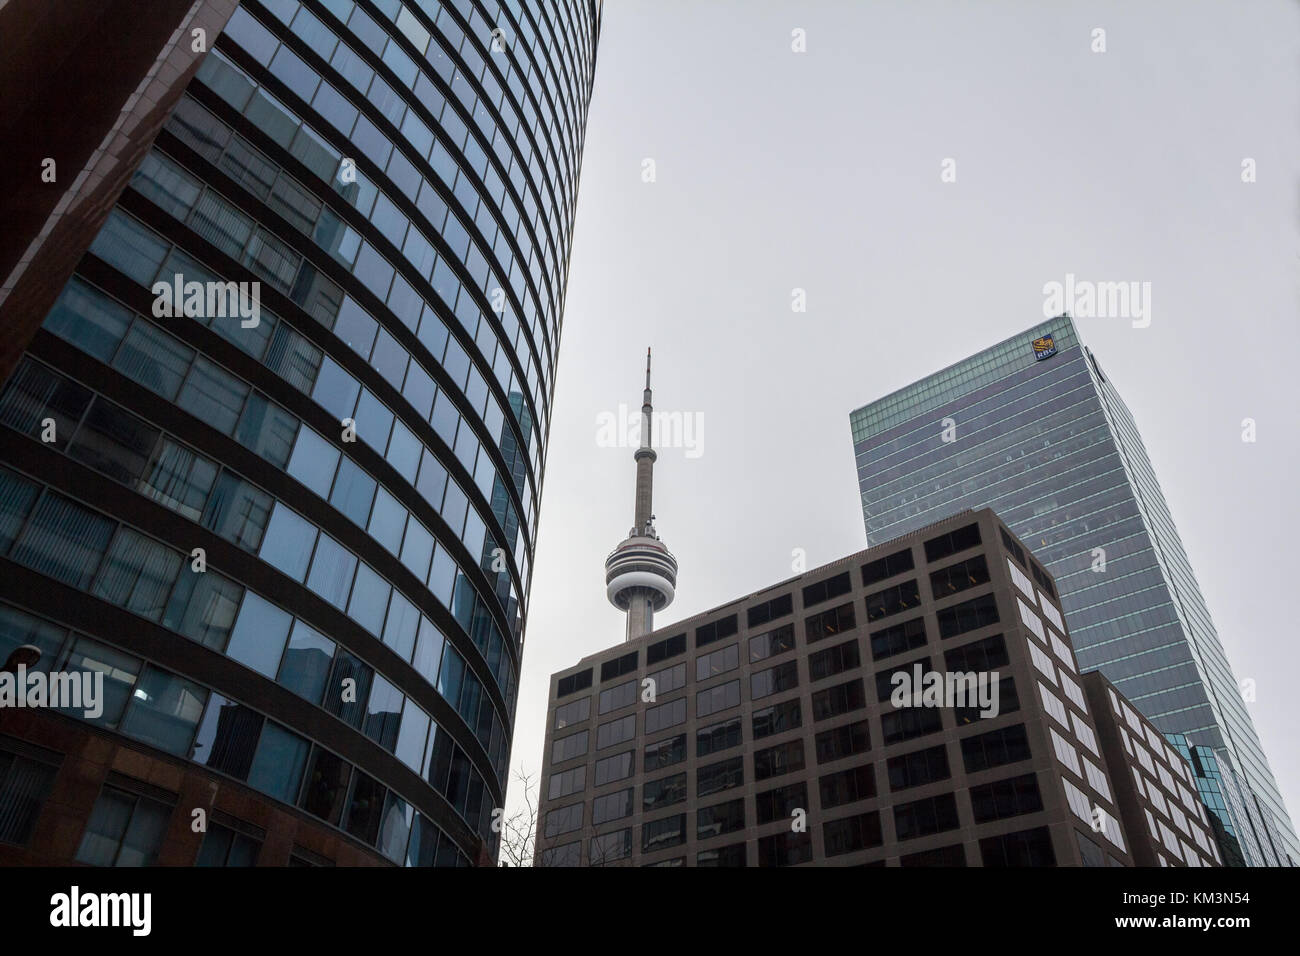 TORONTO, CANADA - DECEMBER 31, 2016: Canadian National Tower (CN Tower) surrounded by more modern buildings in downtown Toronto. CN Tower is the talle Stock Photo